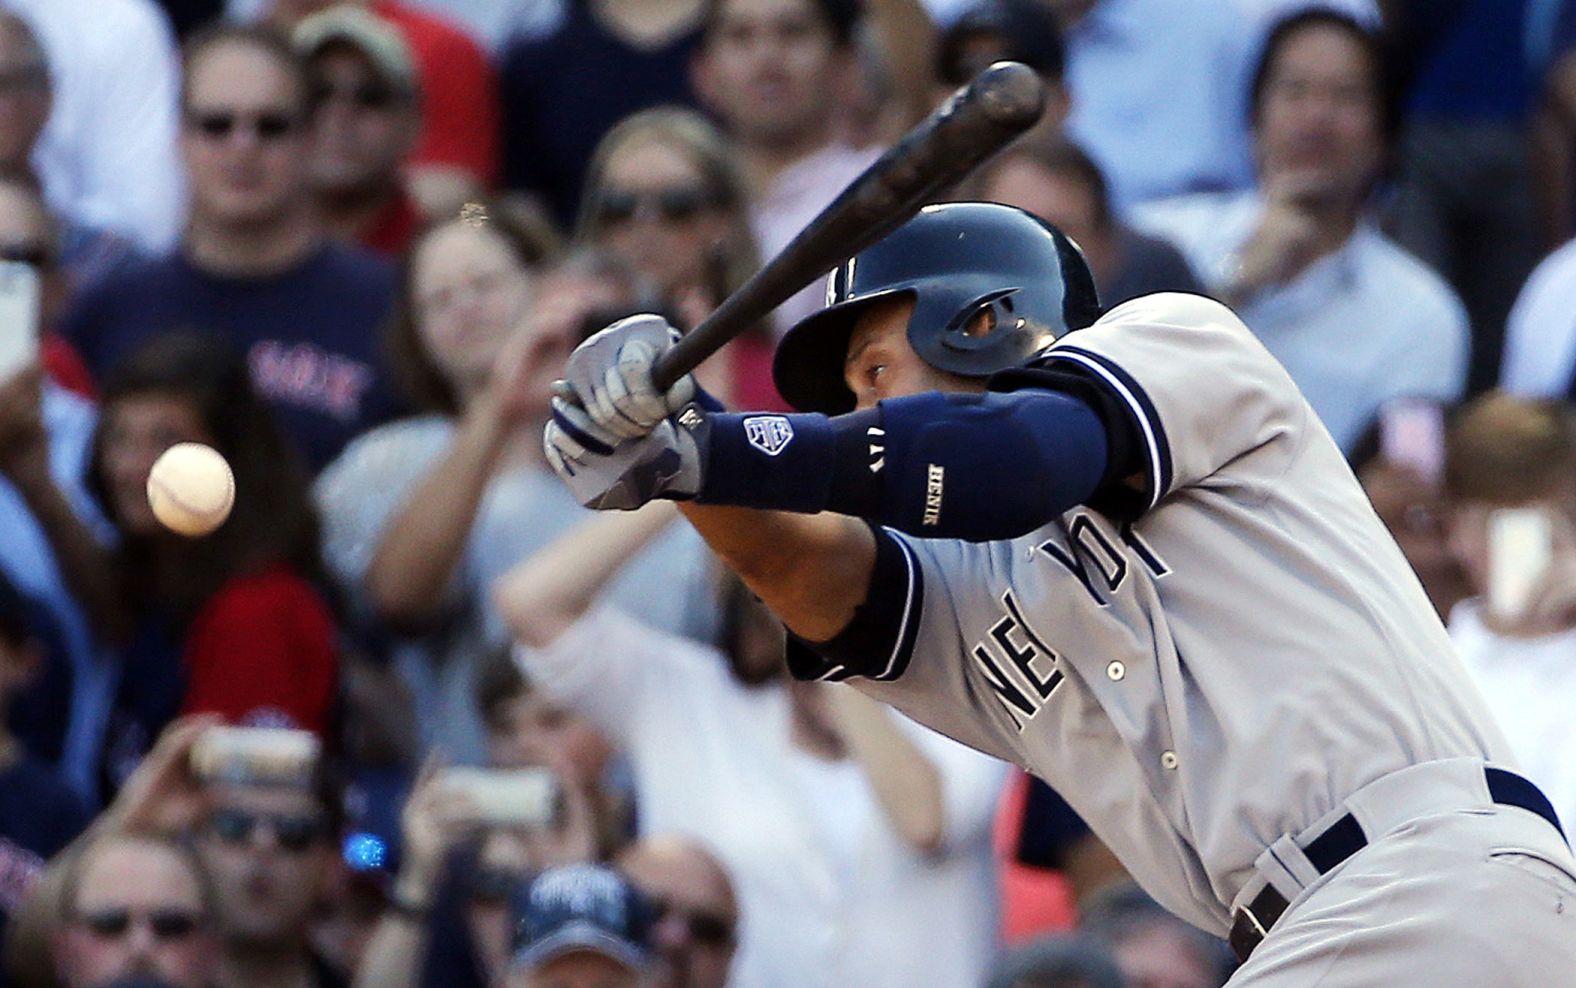 Jeter hits a single against Boston in the final game of his career.